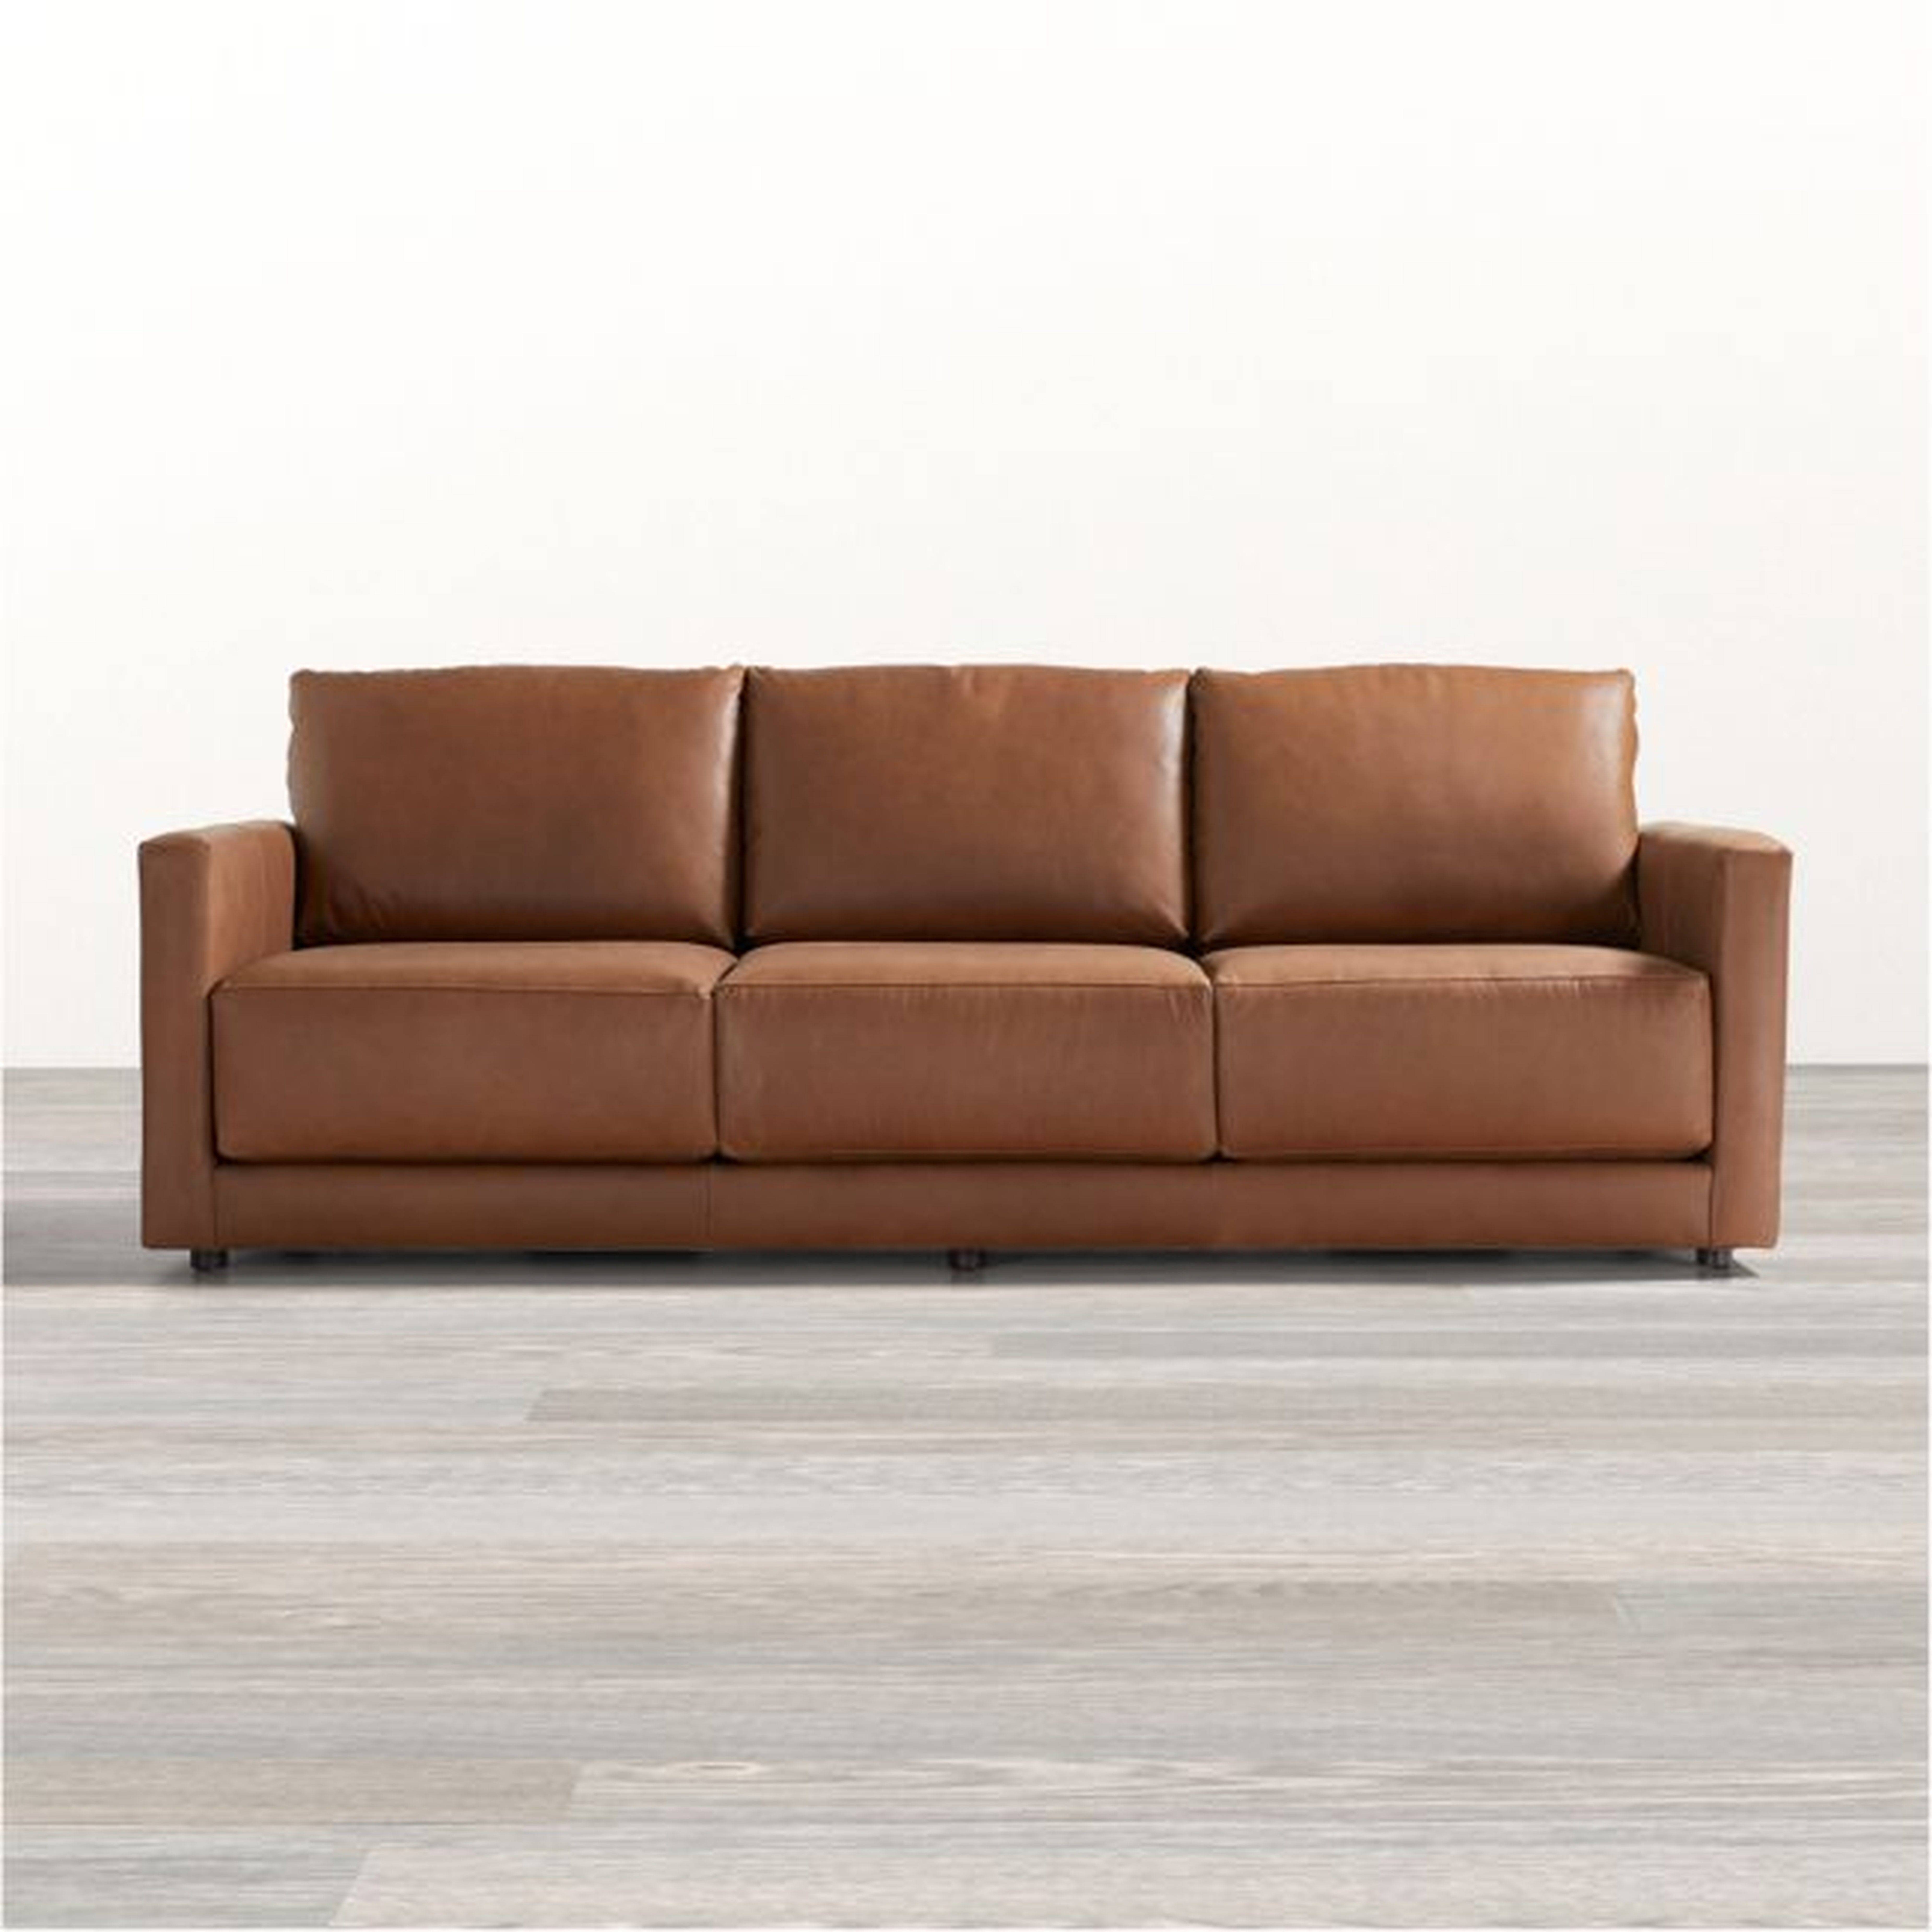 Gather Leather Sofa 98" - Crate and Barrel